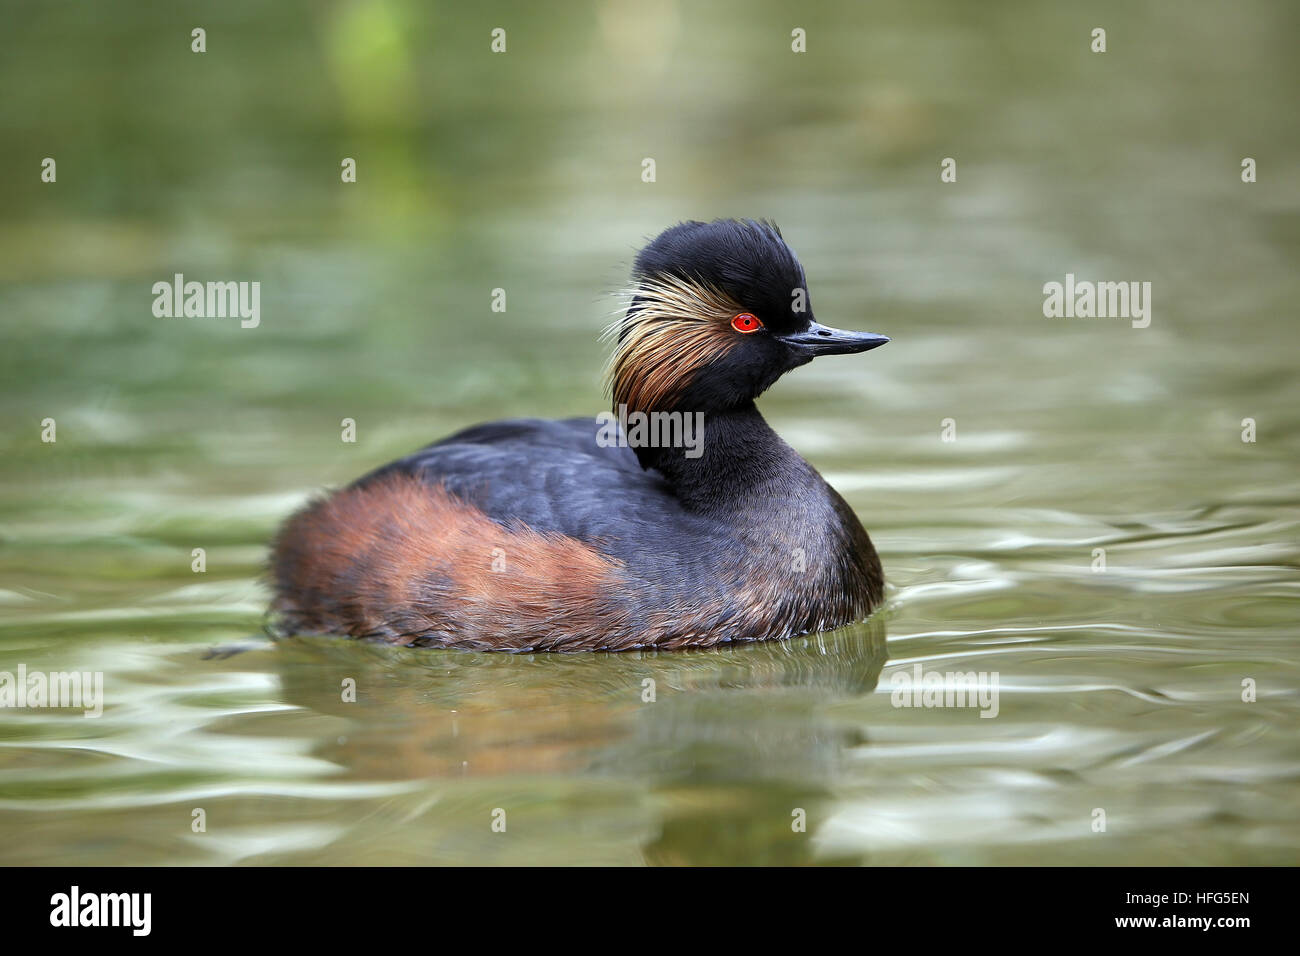 Black-necked Grebe, podiceps nigricollis, Adult Swimming on Pond, Pyrenees in the South West of France Stock Photo